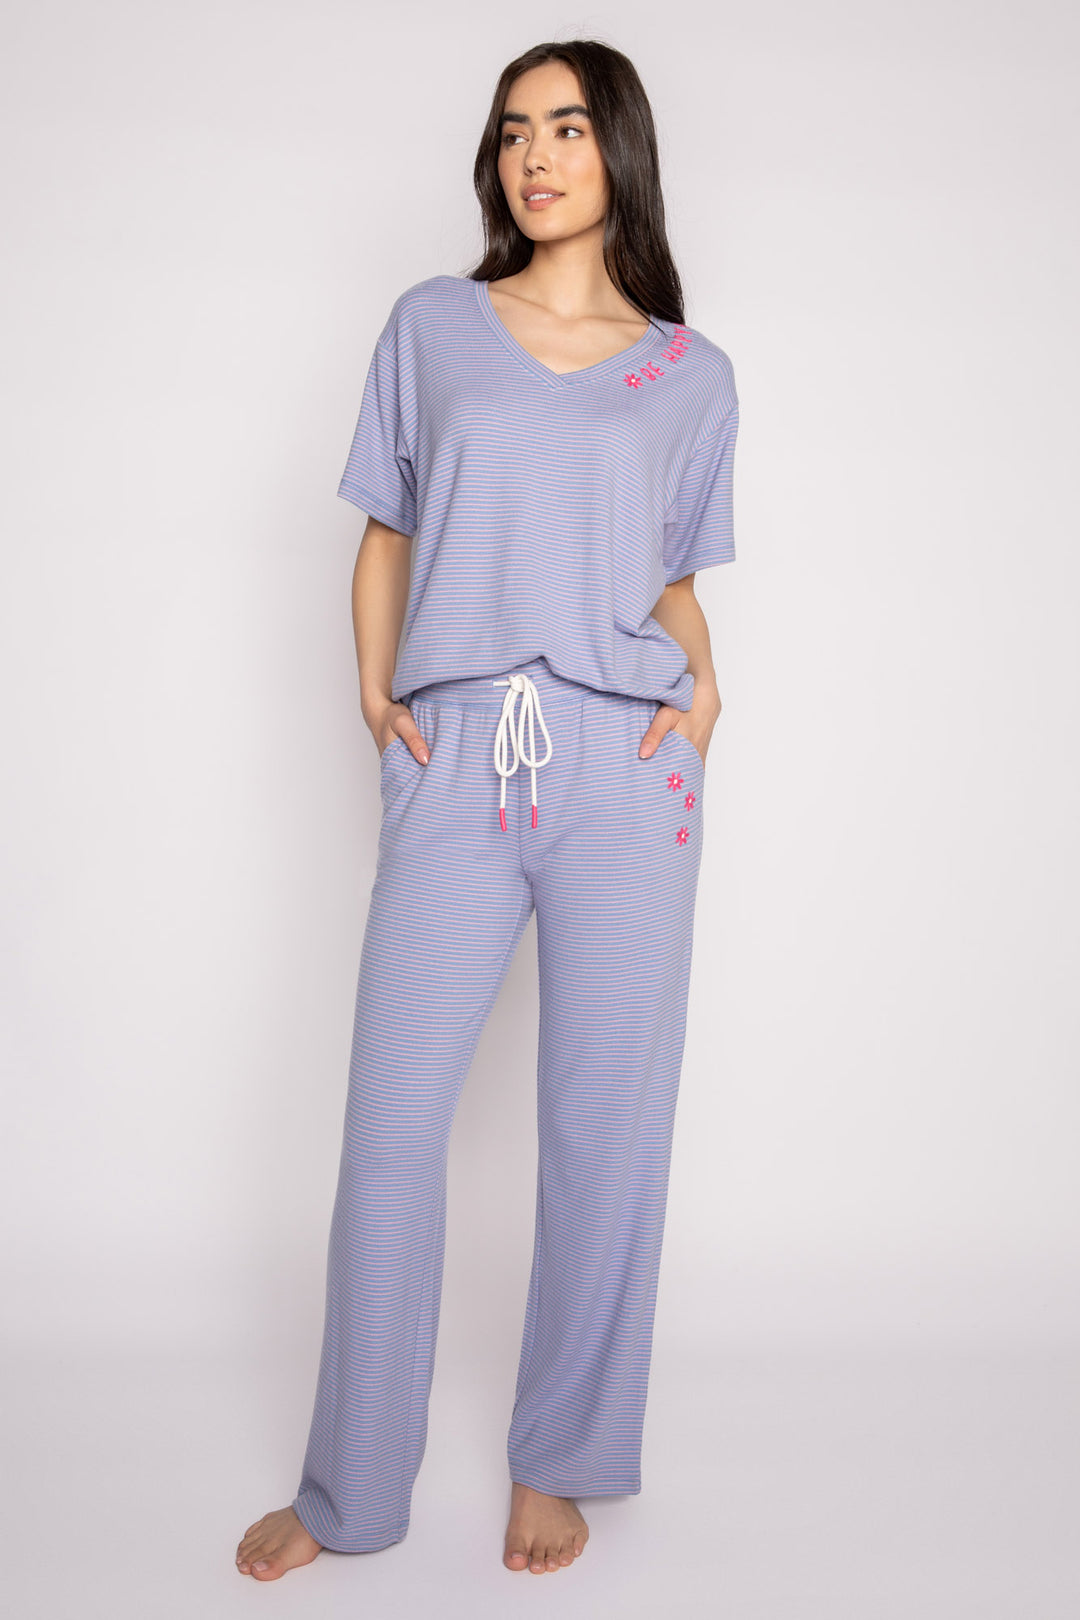 Mini thermal pajama set in blue-lilac pinstripe. Pant with side pockets & V-neck tee with pink embroidery details on both. (7231875448932)